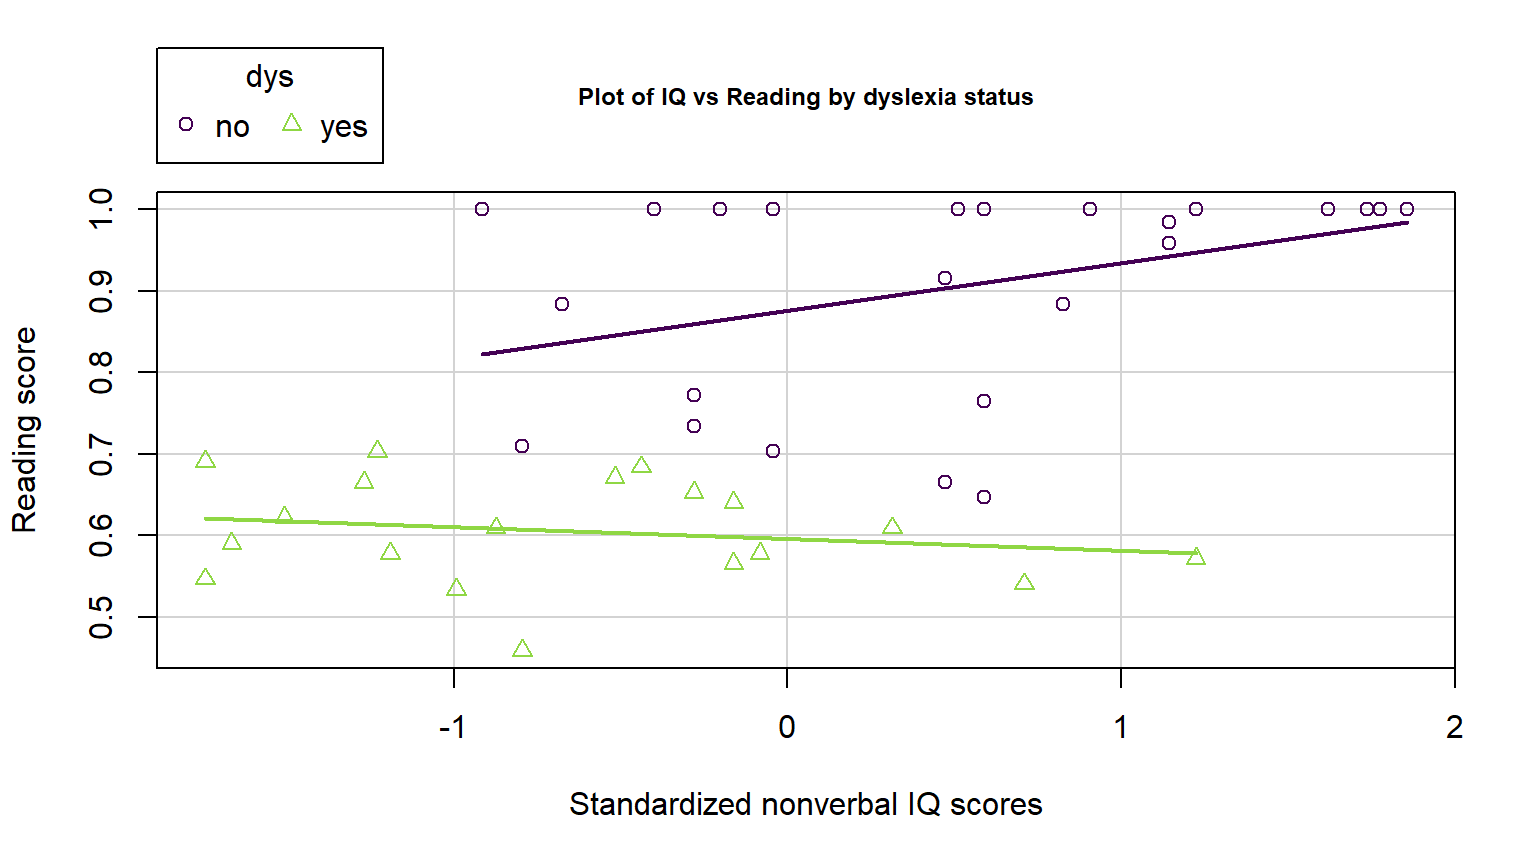 Scatterplot for reading score versus nonverbal IQ by dyslexia group.